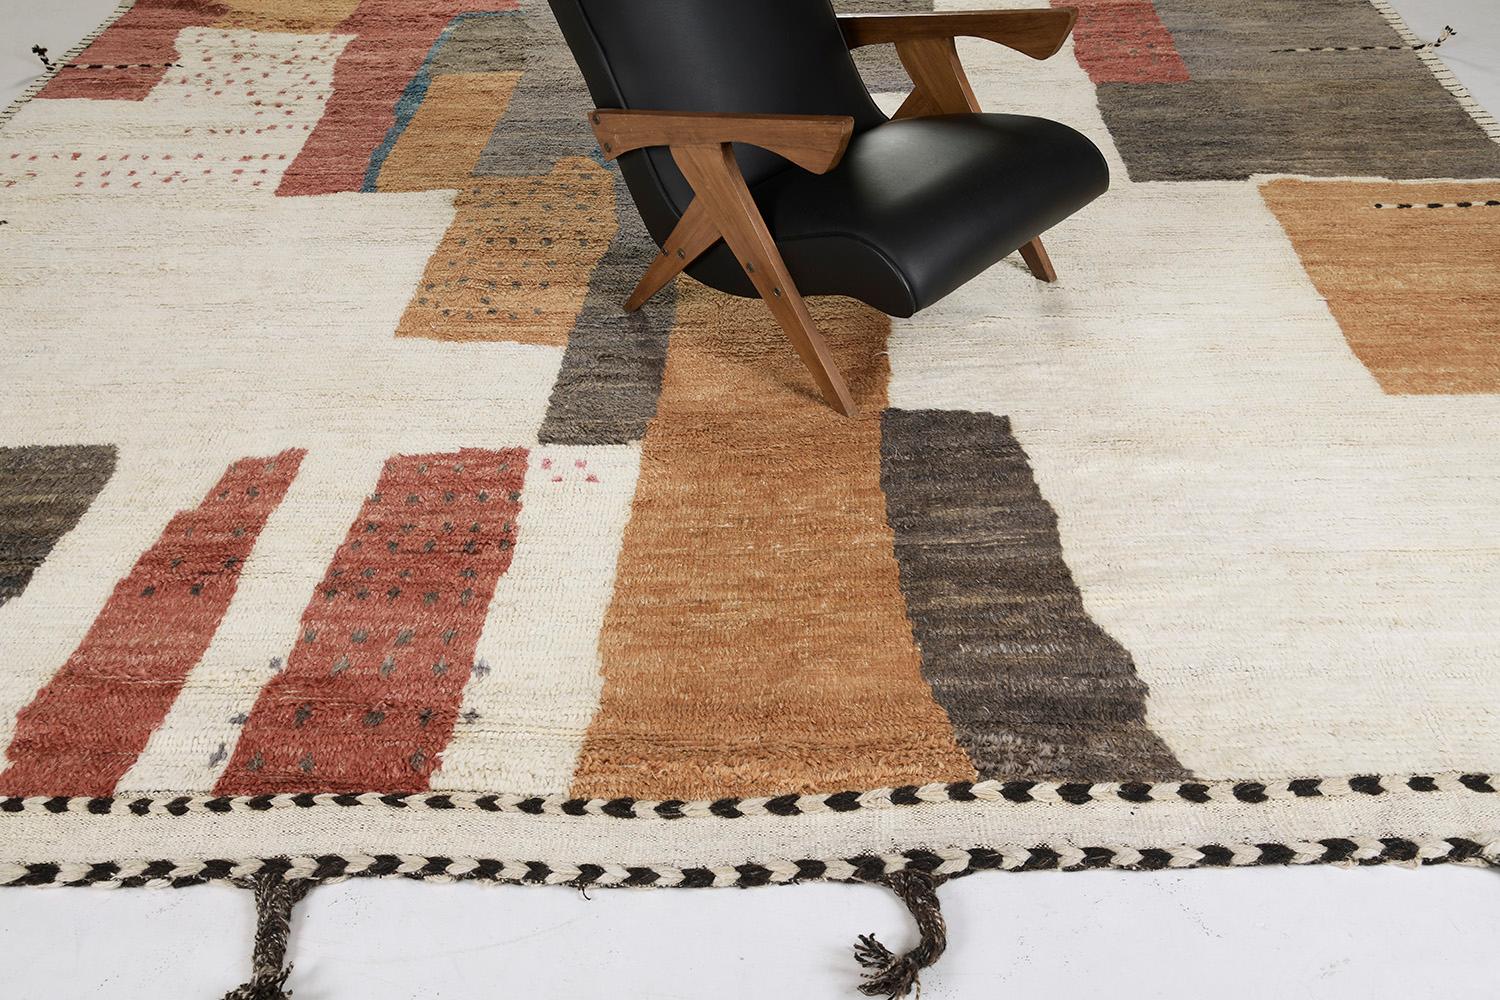 Iriqui is a beautifully textured rug with irregular motifs inspired by the Atlas Mountains of Morocco. The multi-colors of red, orange, gold, and ivory work cohesively to make for a great contemporary interpretation of the modern design world.